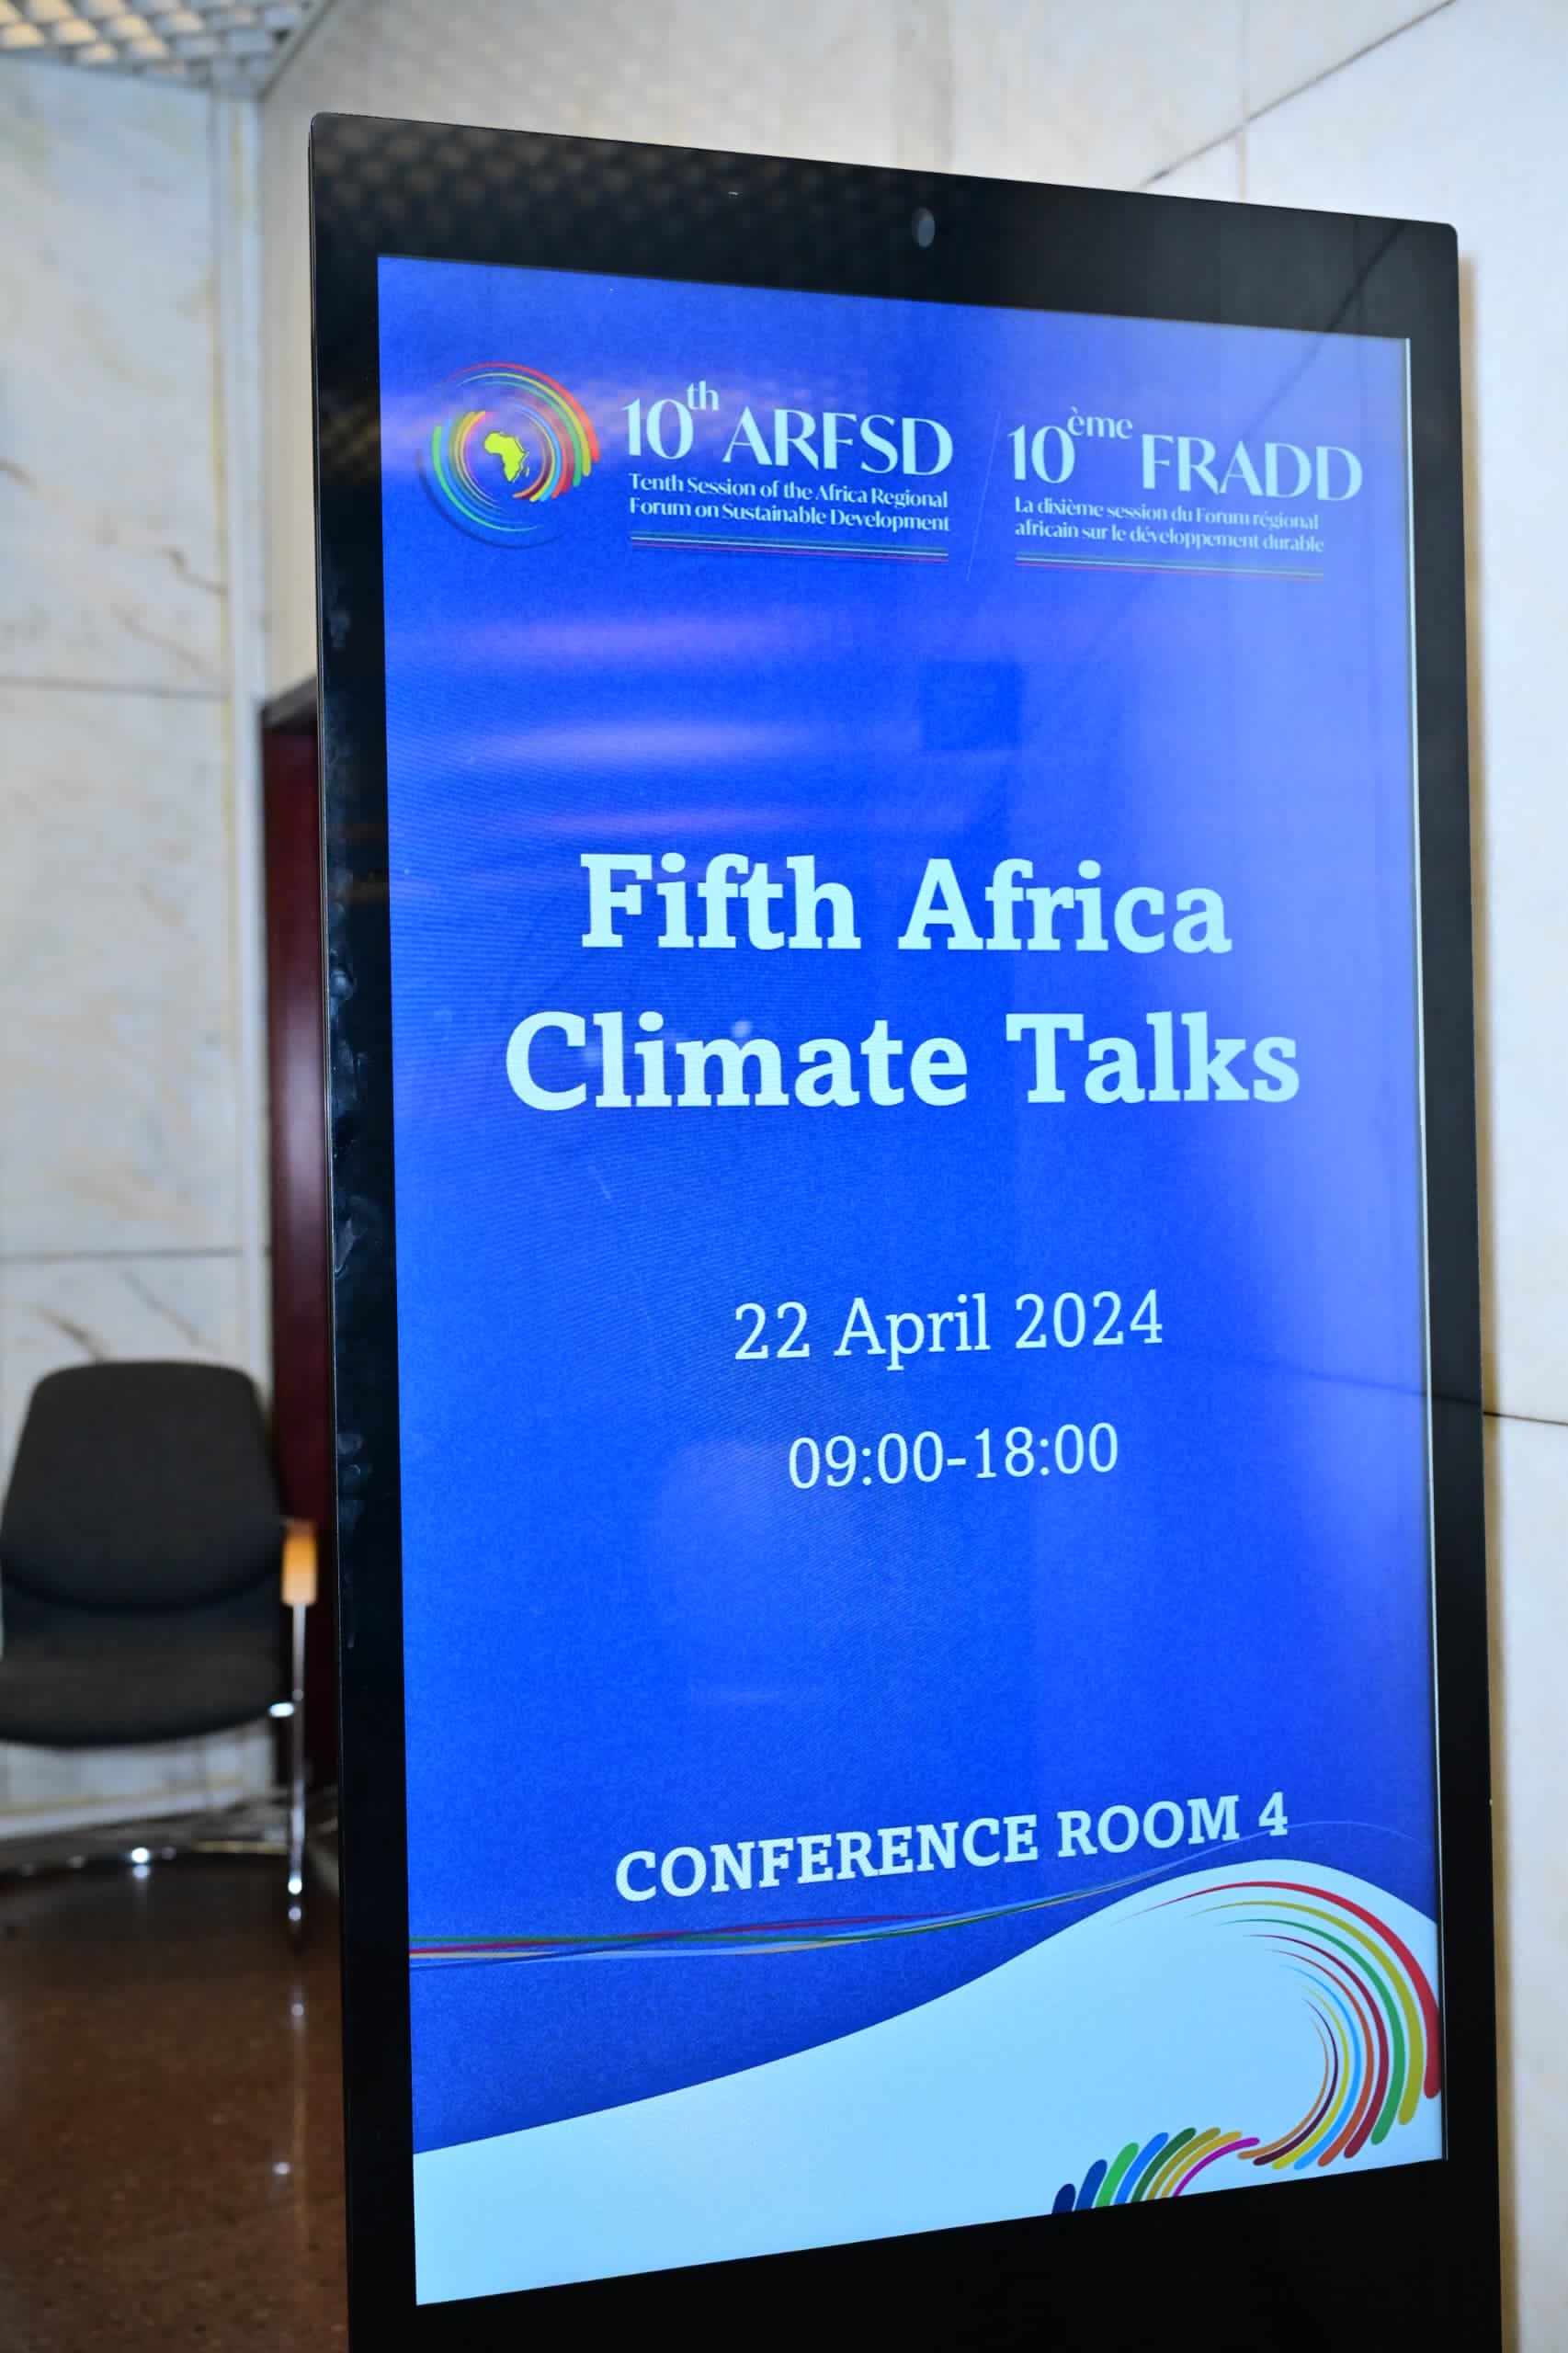 The 5th Africa Climate Talks